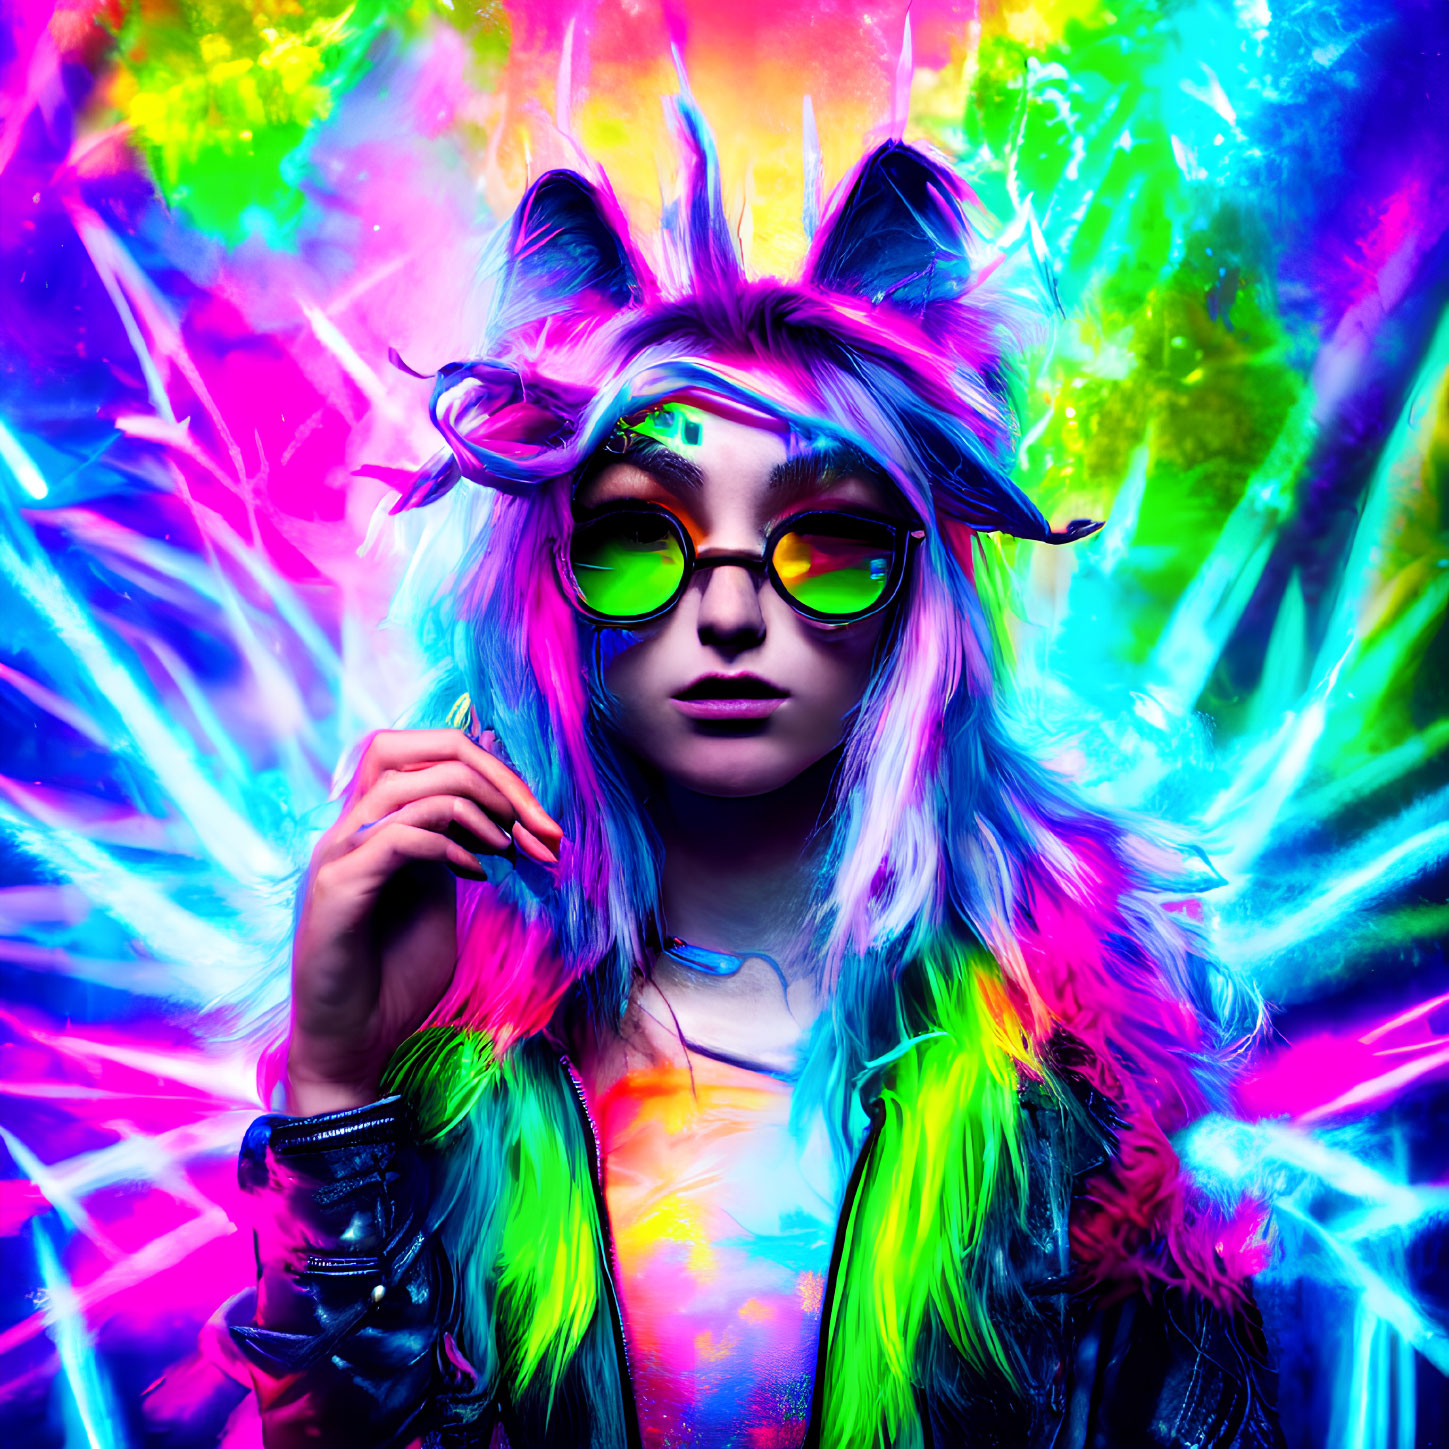 Colorful Hair and Fur Ears on Person with Green Glasses in Neon Setting